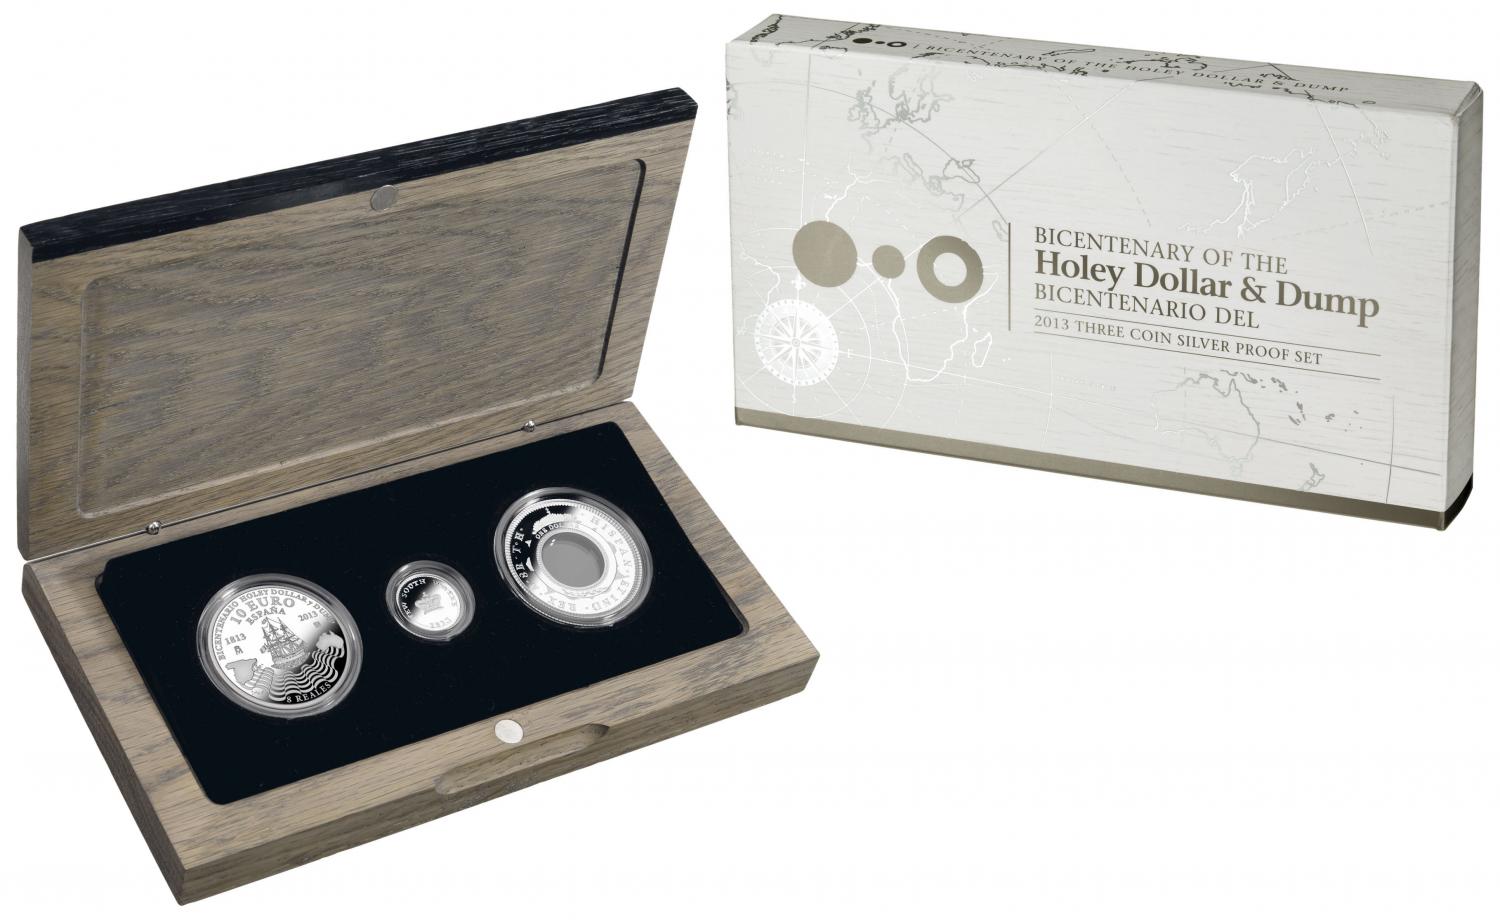 Thumbnail for 2013 Bicentenary of the Holey Dollar & Dump 3 Coin Silver Proof Set